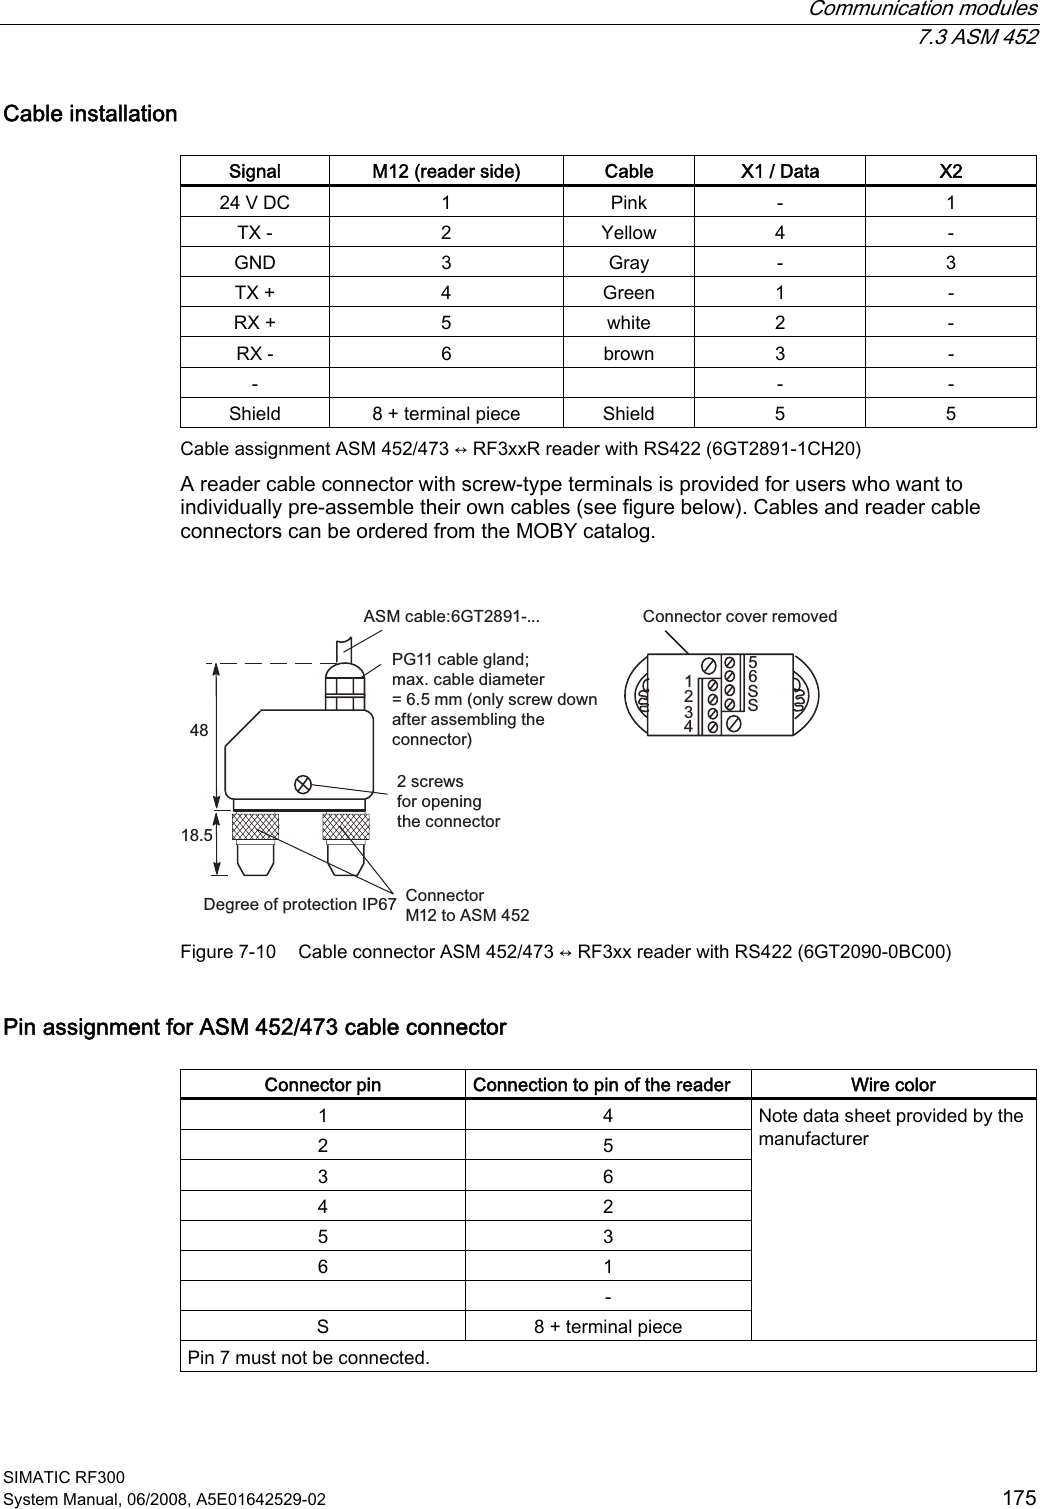  Communication modules  7.3 ASM 452 SIMATIC RF300 System Manual, 06/2008, A5E01642529-02  175 Cable installation  Signal  M12 (reader side)  Cable  X1 / Data  X2 24 V DC  1  Pink  -  1 TX -  2  Yellow  4  - GND  3  Gray  -  3 TX +  4  Green  1  - RX +  5  white  2  - RX -  6  brown  3  - -      -  - Shield  8 + terminal piece  Shield  5  5 Cable assignment ASM 452/473 ↔ RF3xxR reader with RS422 (6GT2891-1CH20) A reader cable connector with screw-type terminals is provided for users who want to individually pre-assemble their own cables (see figure below). Cables and reader cable connectors can be ordered from the MOBY catalog.  66VFUHZVIRURSHQLQJWKHFRQQHFWRU&amp;RQQHFWRU0WR$60&apos;HJUHHRISURWHFWLRQ,33*FDEOHJODQGPD[FDEOHGLDPHWHU PPRQO\VFUHZGRZQDIWHUDVVHPEOLQJWKHFRQQHFWRU$60FDEOH*7 &amp;RQQHFWRUFRYHUUHPRYHG Figure 7-10  Cable connector ASM 452/473 ↔ RF3xx reader with RS422 (6GT2090-0BC00)  Pin assignment for ASM 452/473 cable connector  Connector pin  Connection to pin of the reader  Wire color 1  4 2  5 3  6 4  2 5  3 6  1  - S  8 + terminal piece Note data sheet provided by the manufacturer Pin 7 must not be connected. 